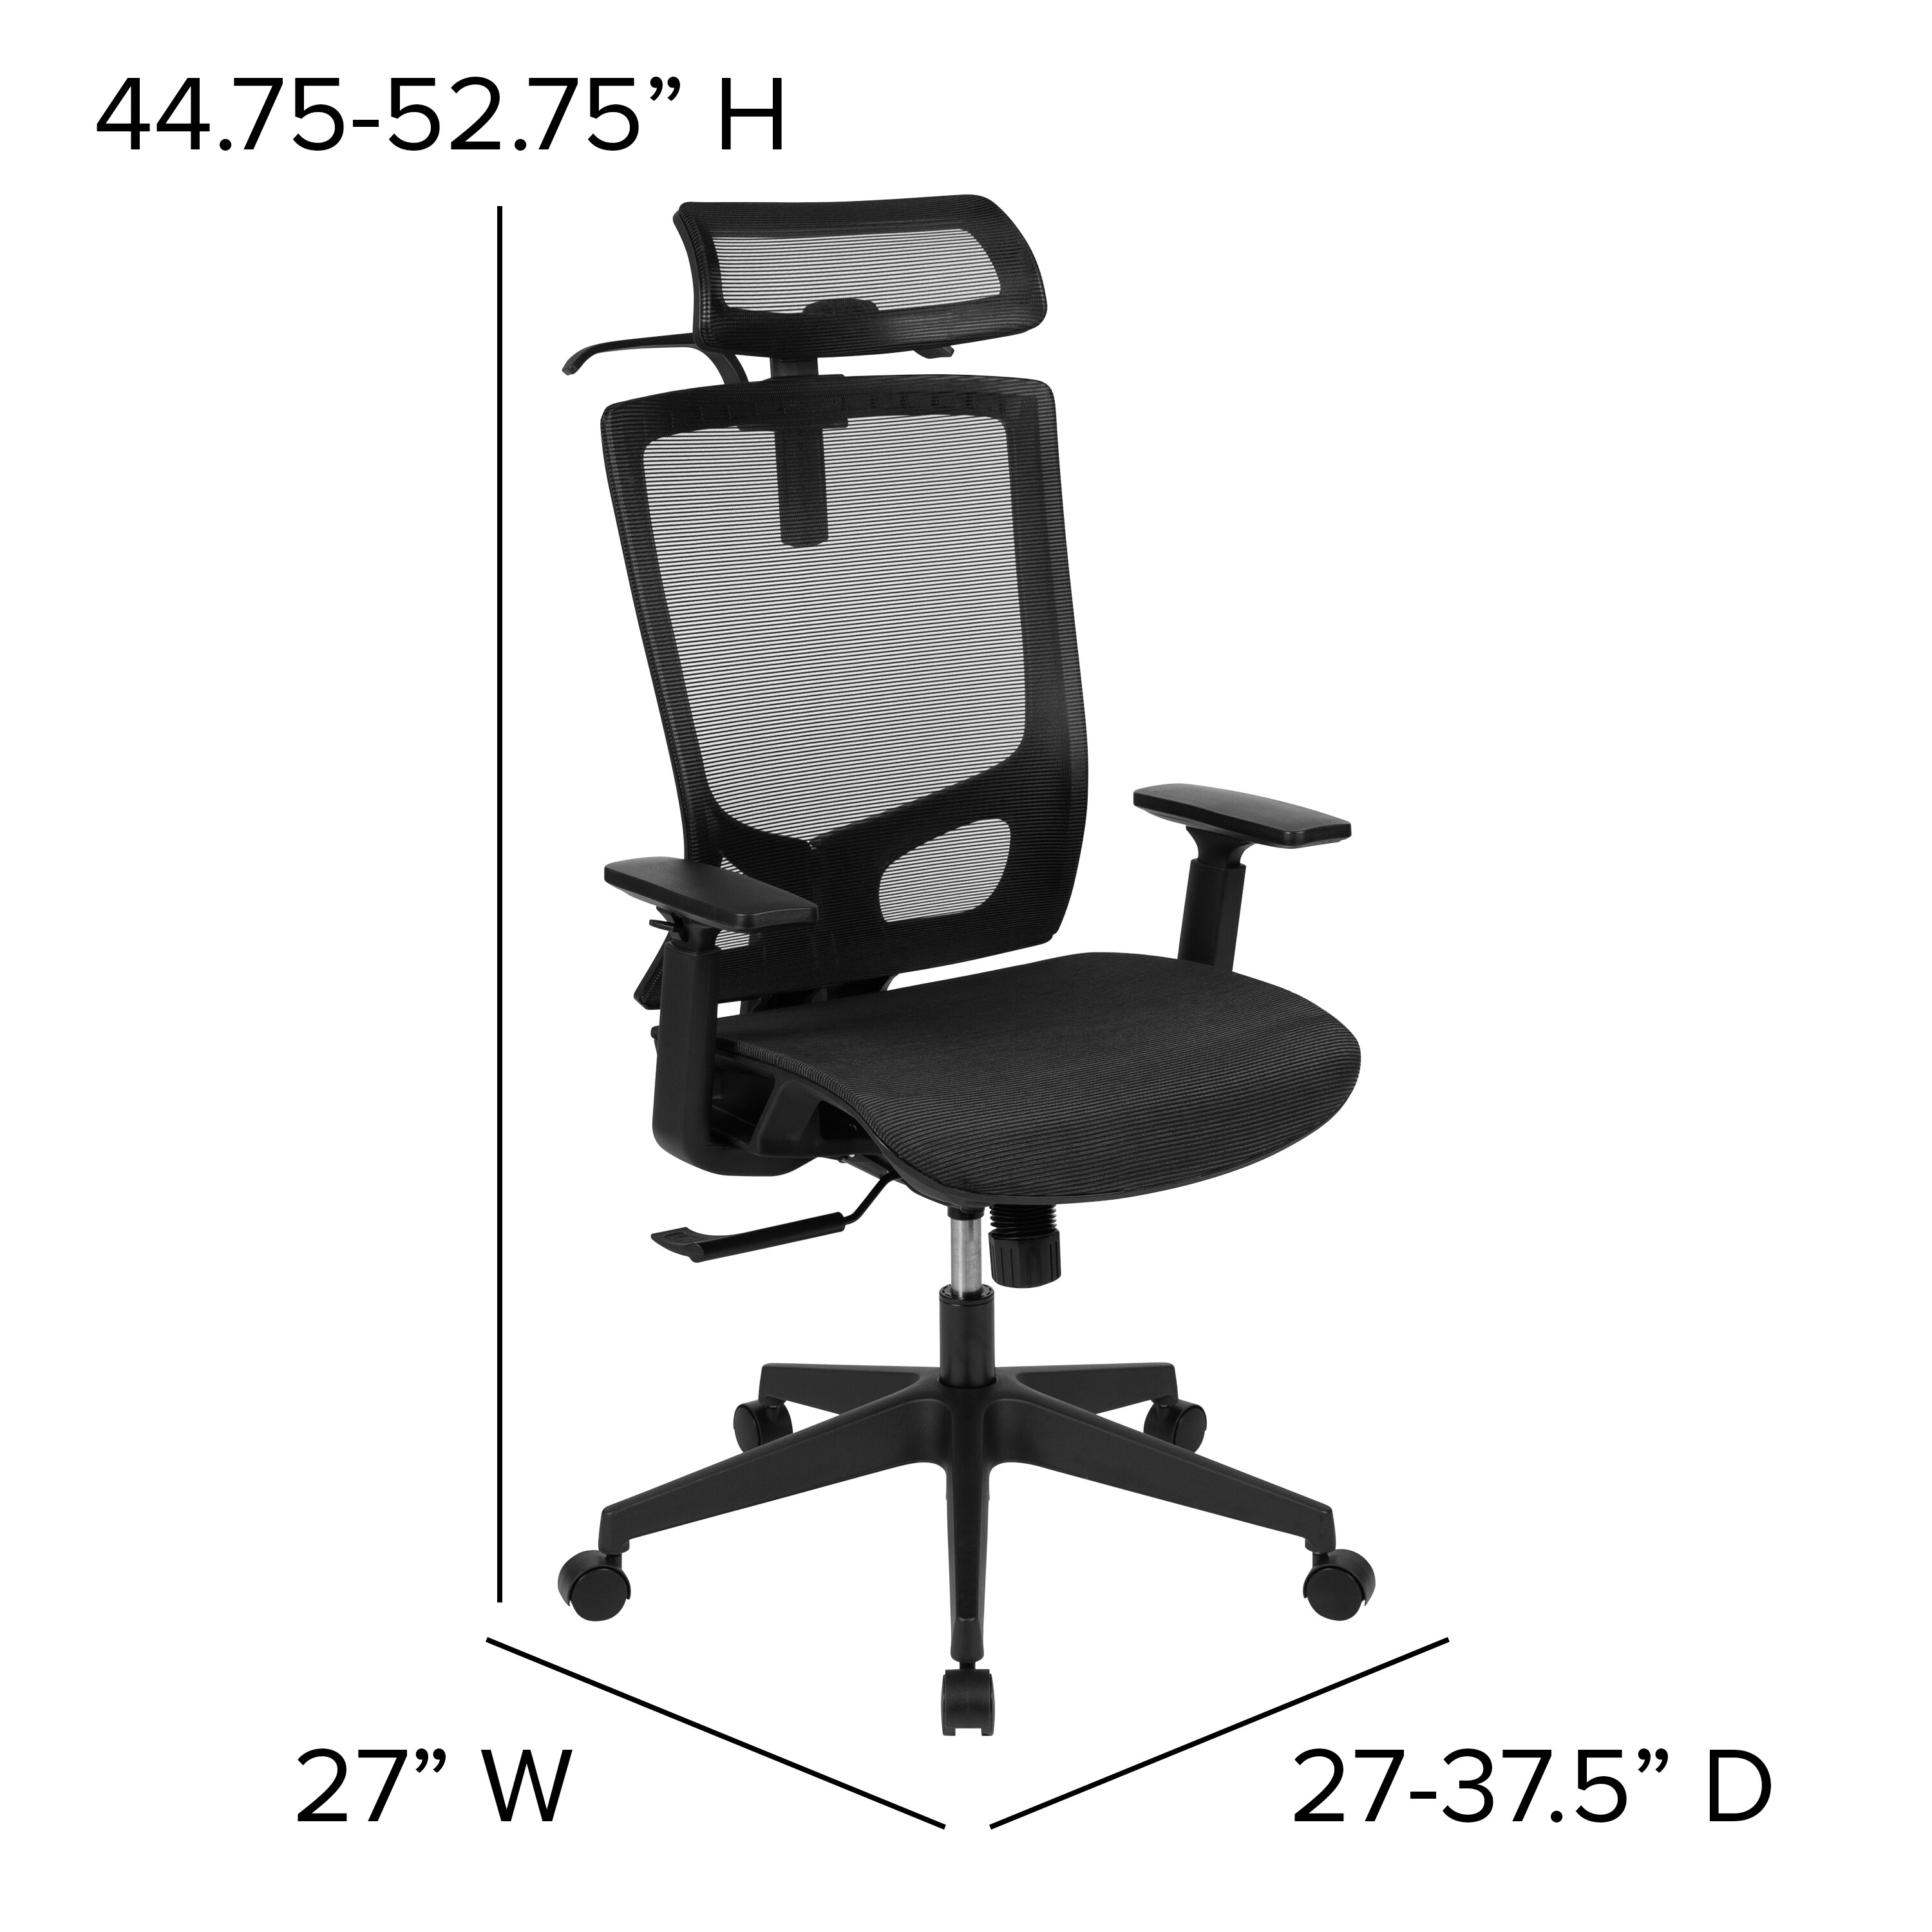 Adjustable Mesh Office Chair with Heating Support Headrest - Black